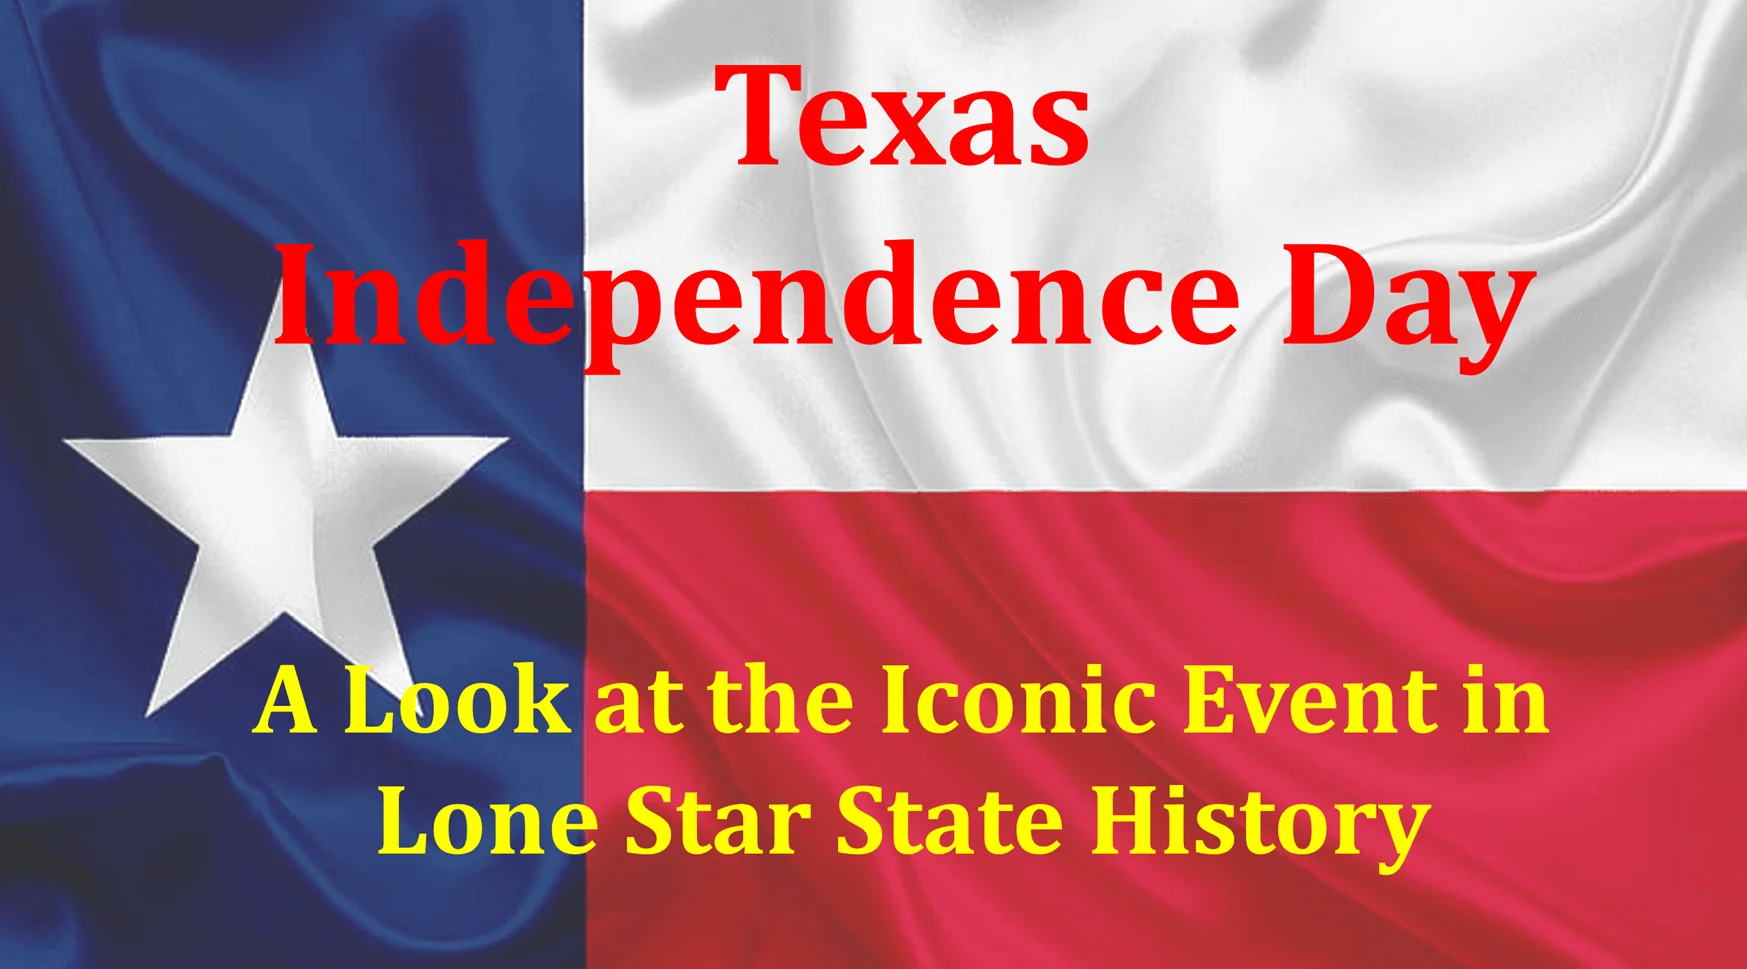 Texas Independence Day A Look at the Iconic Event in Lone Star State